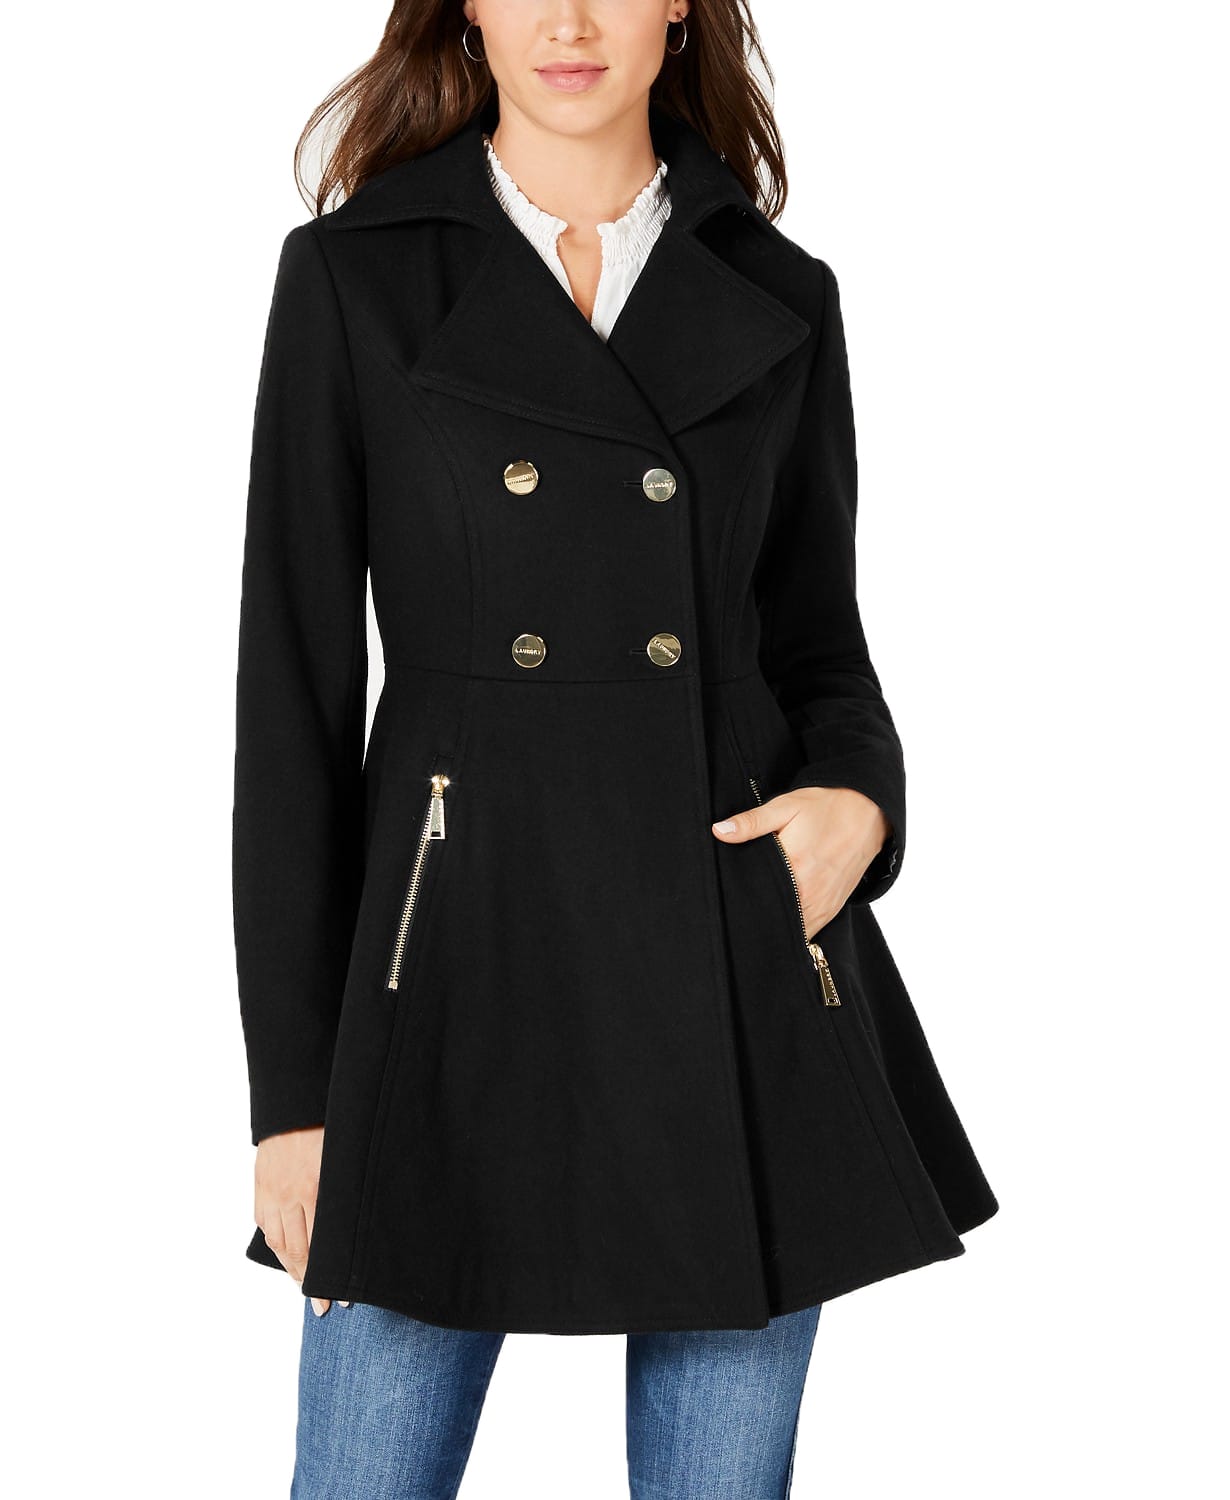 woocommerce-673321-2209615.cloudwaysapps.com-laundry-by-shelli-segal-womens-black-wool-blend-double-breasted-skirted-peacoat